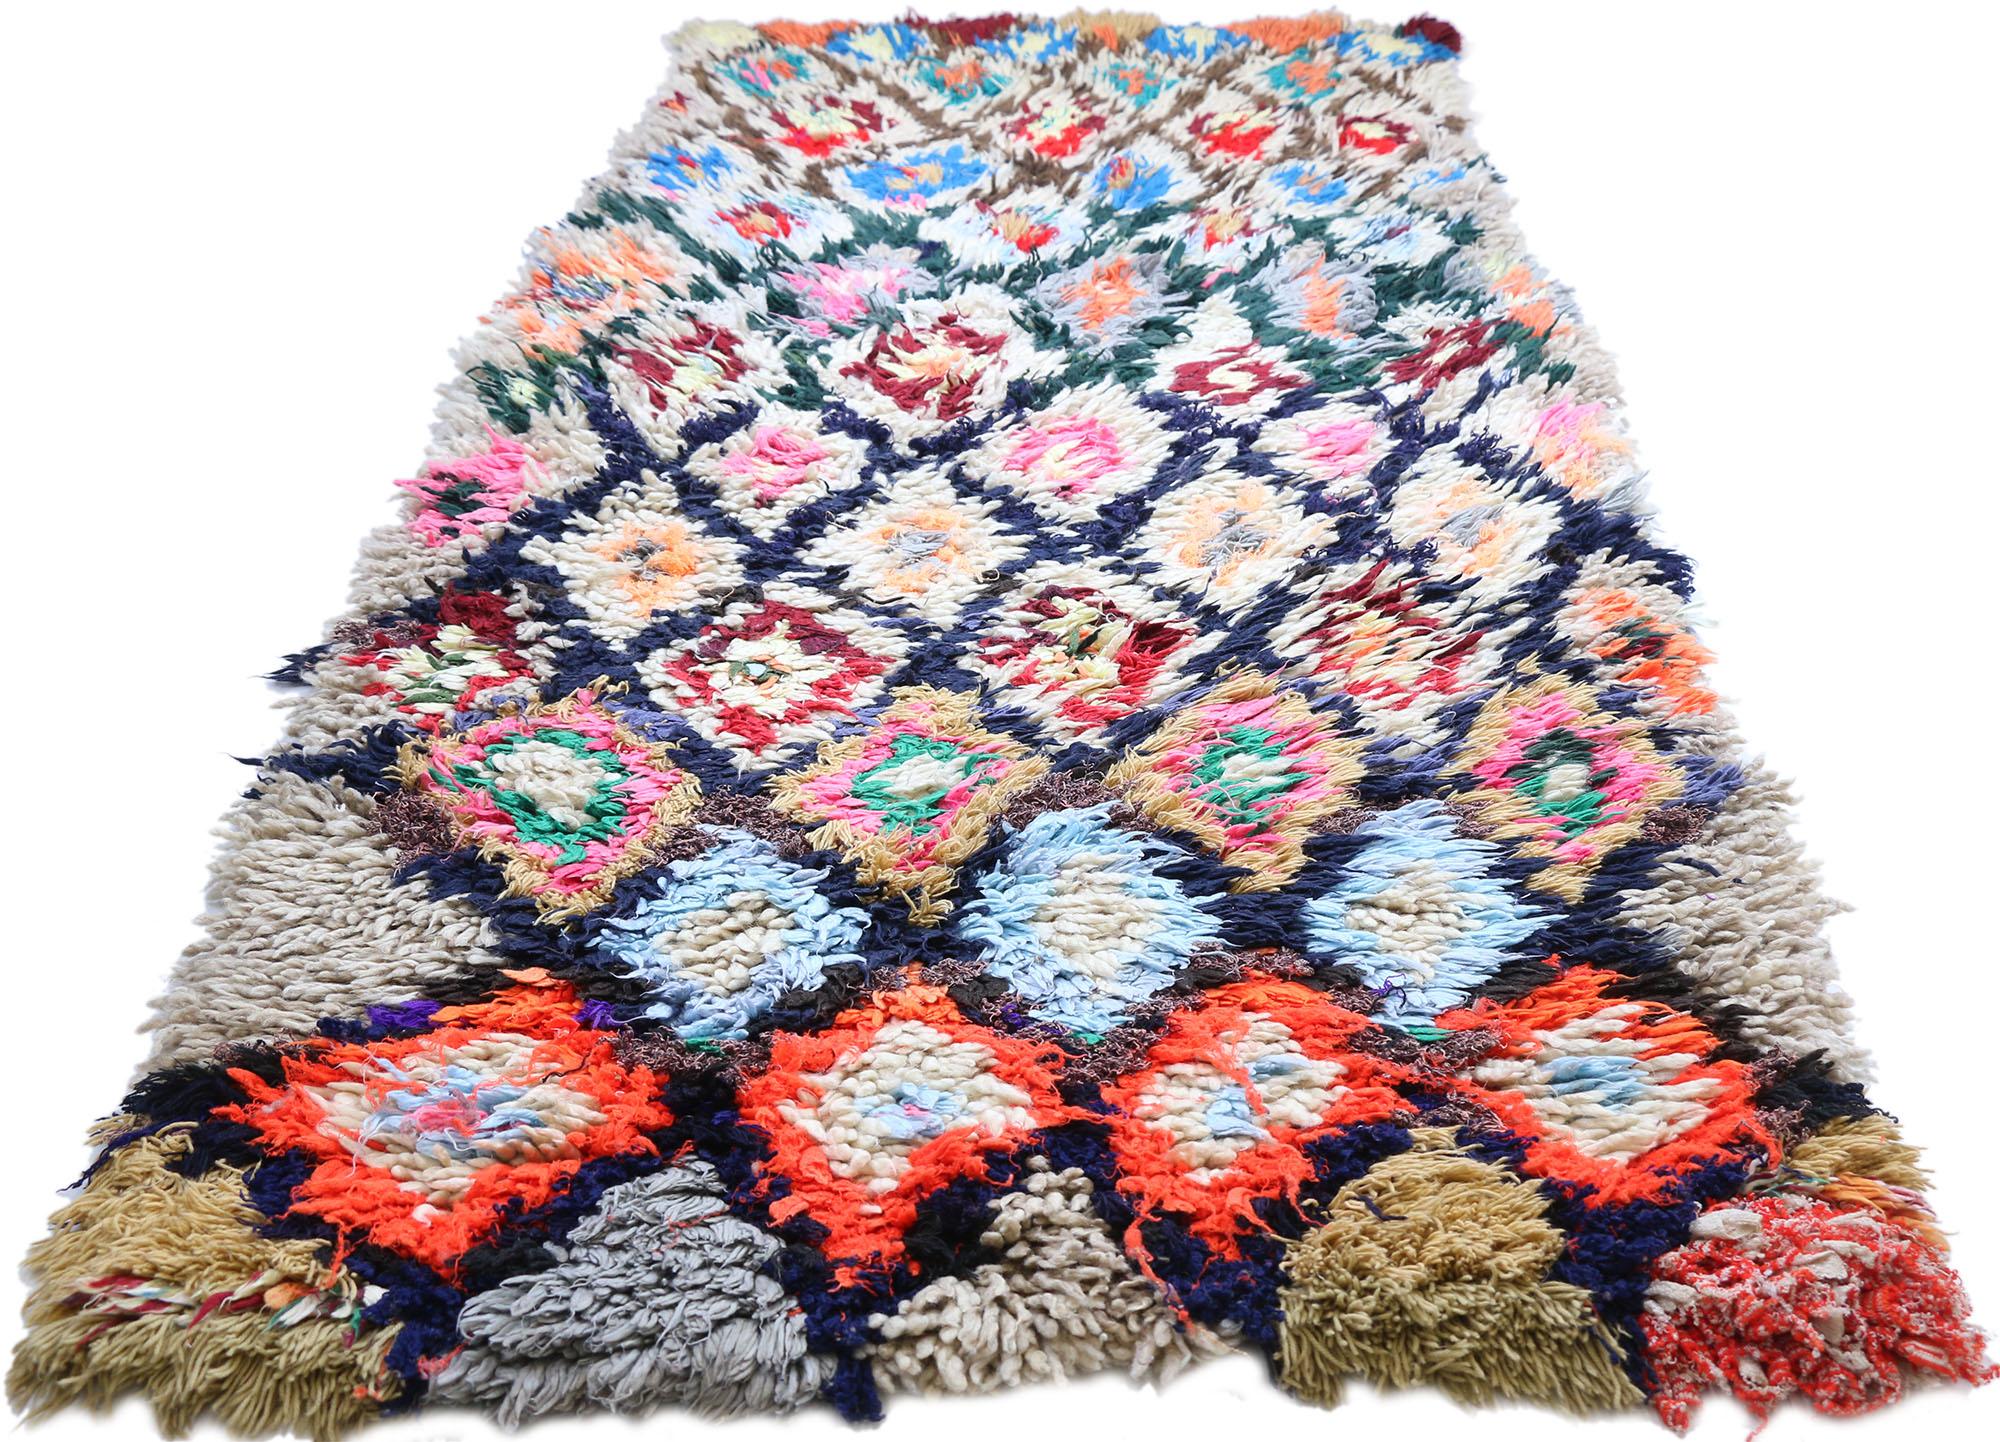 Bohemian Vintage Moroccan Azilal Rug, Berber Colorful Boucherouite Rug with Tribal Style